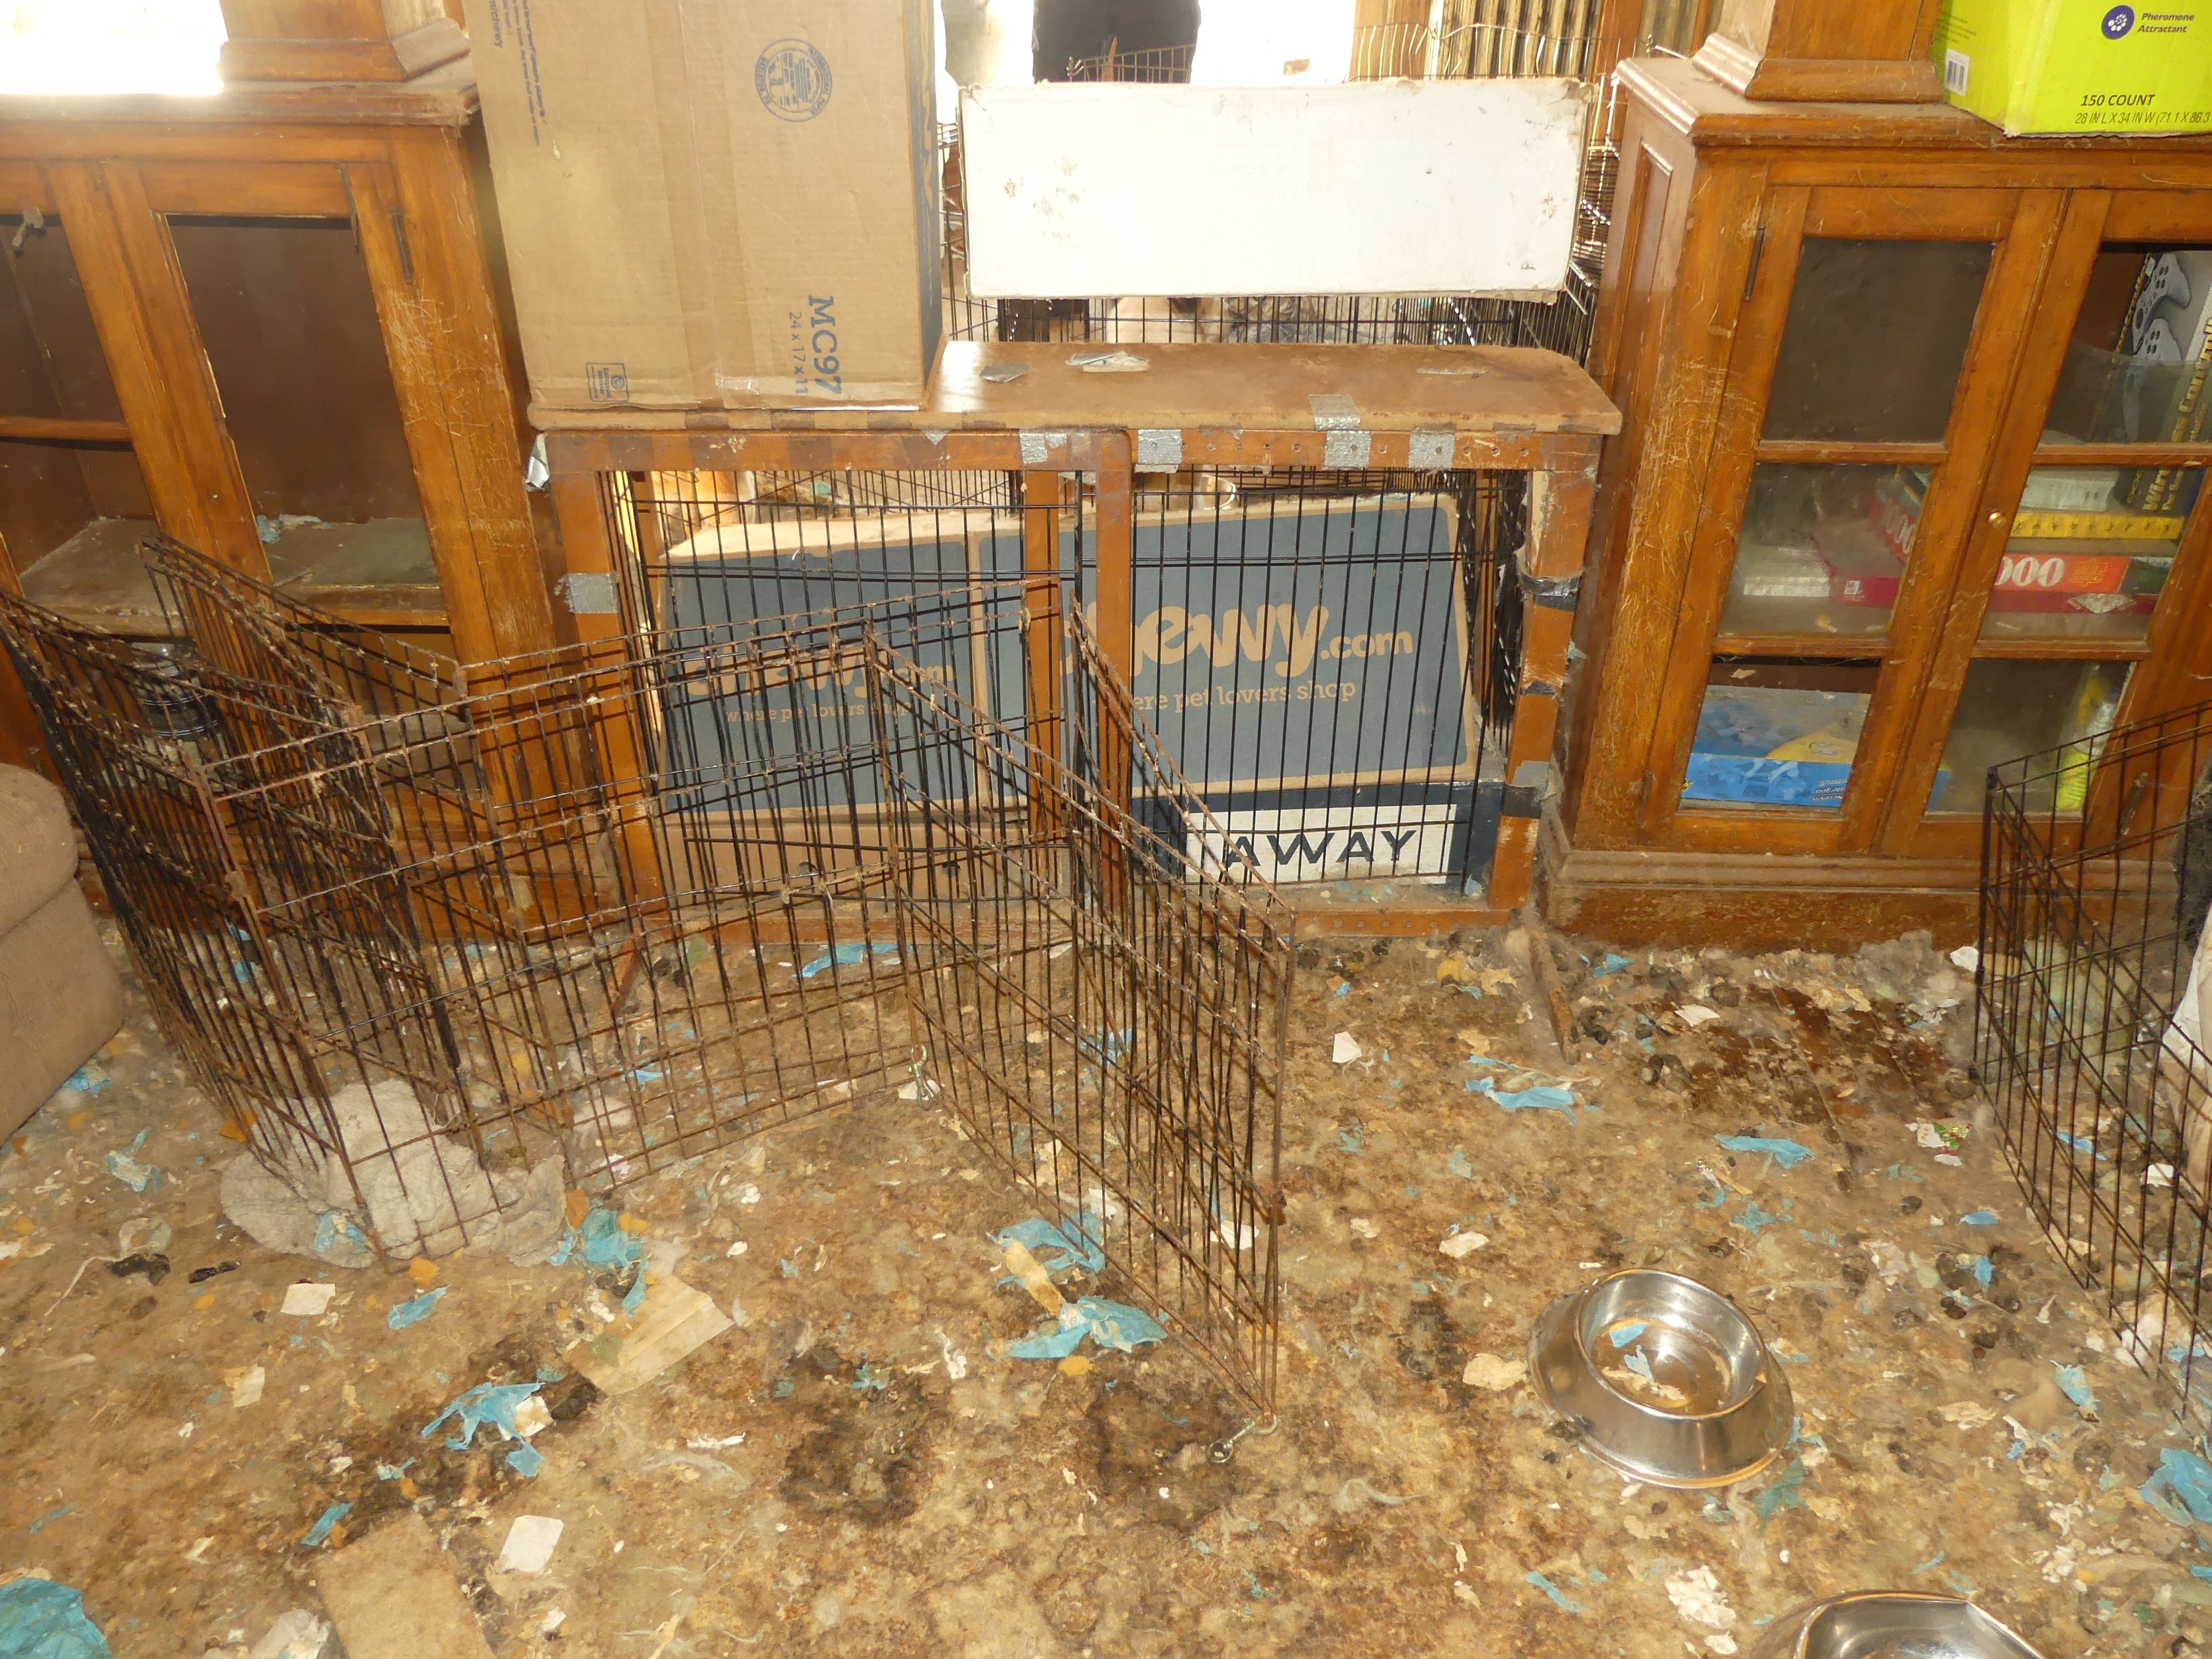 Photos of a home in Malden where investigators say 18 dogs were found living in unsanitary conditions.